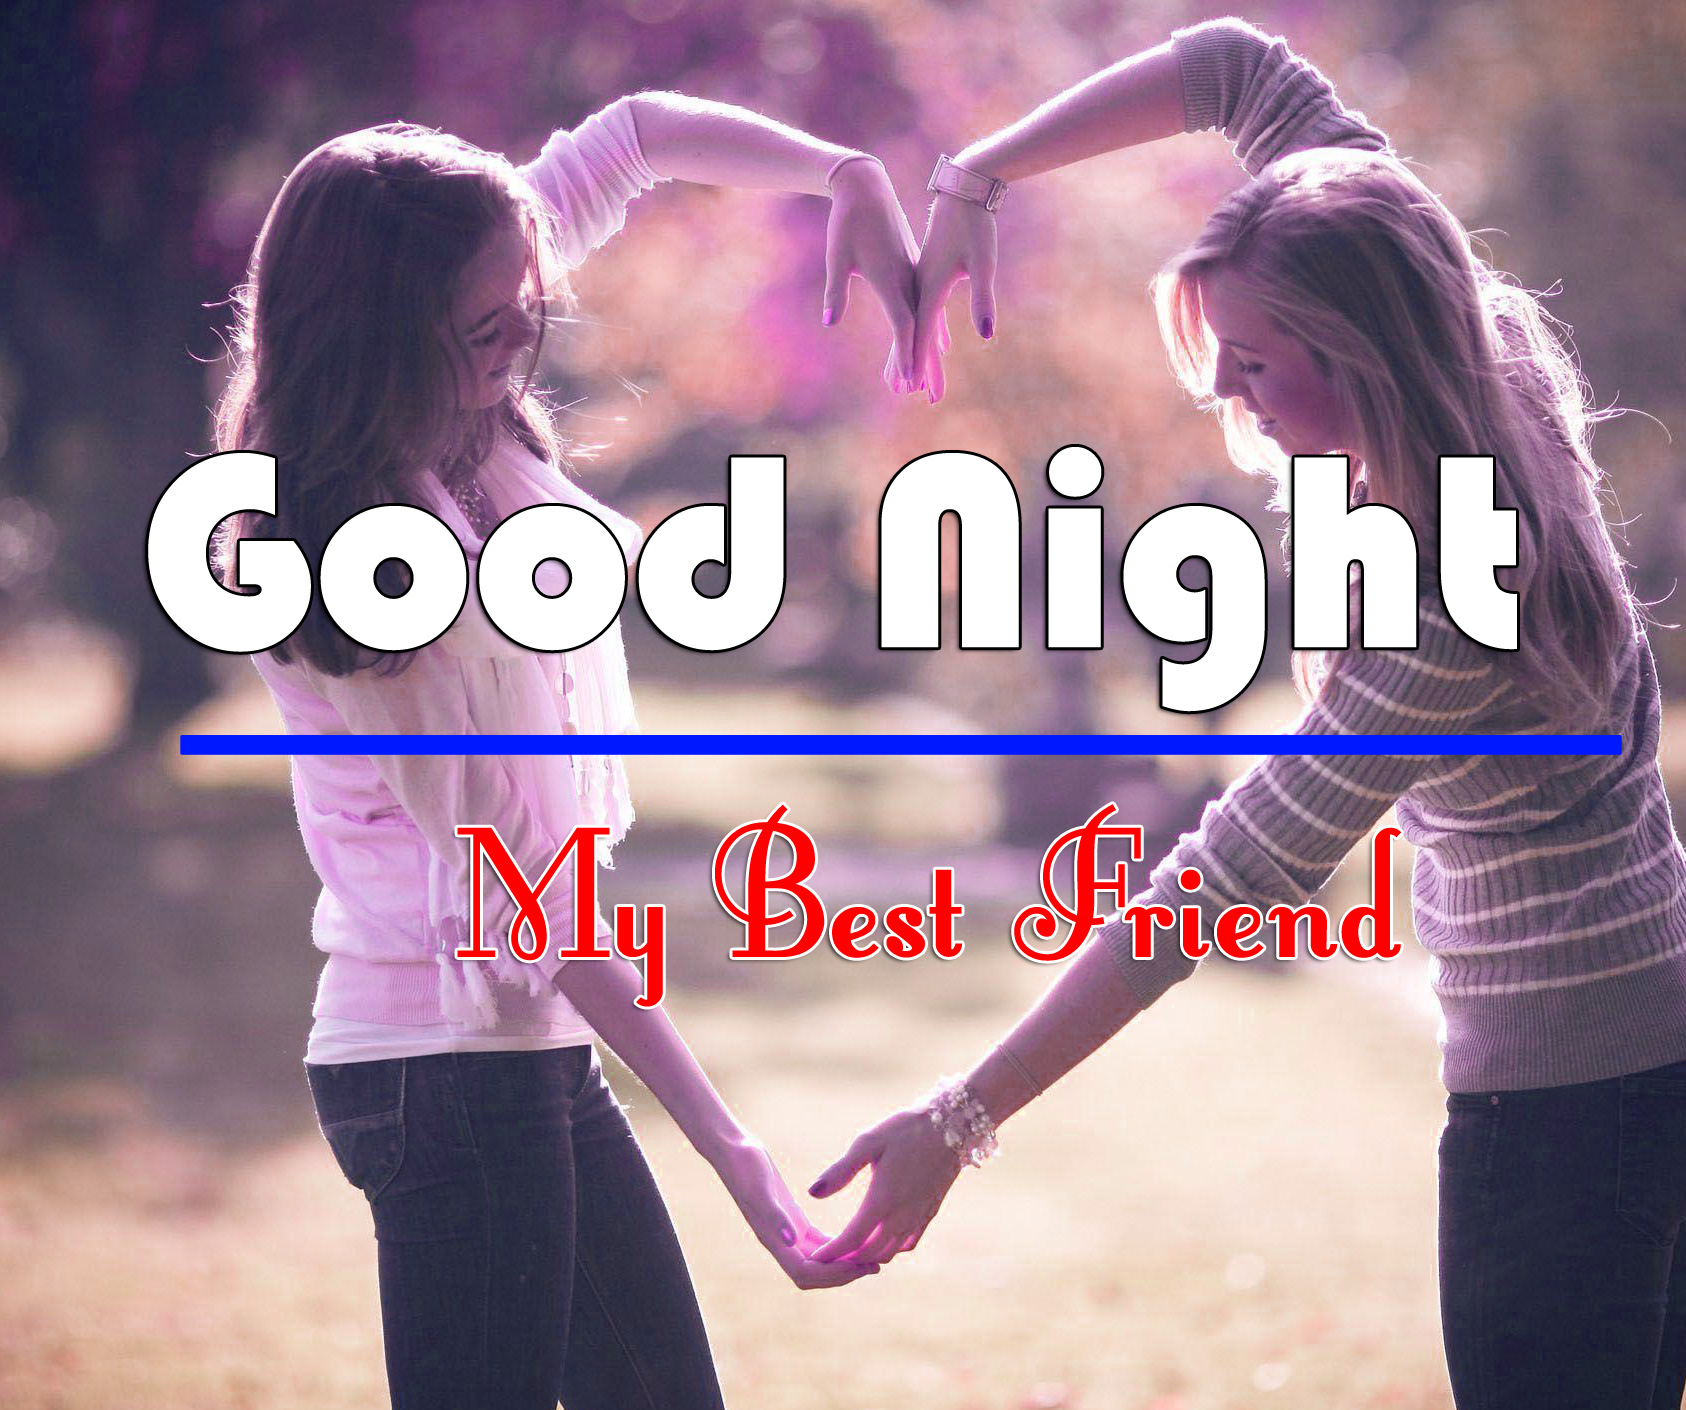 Good Night Images For Best Friends 5